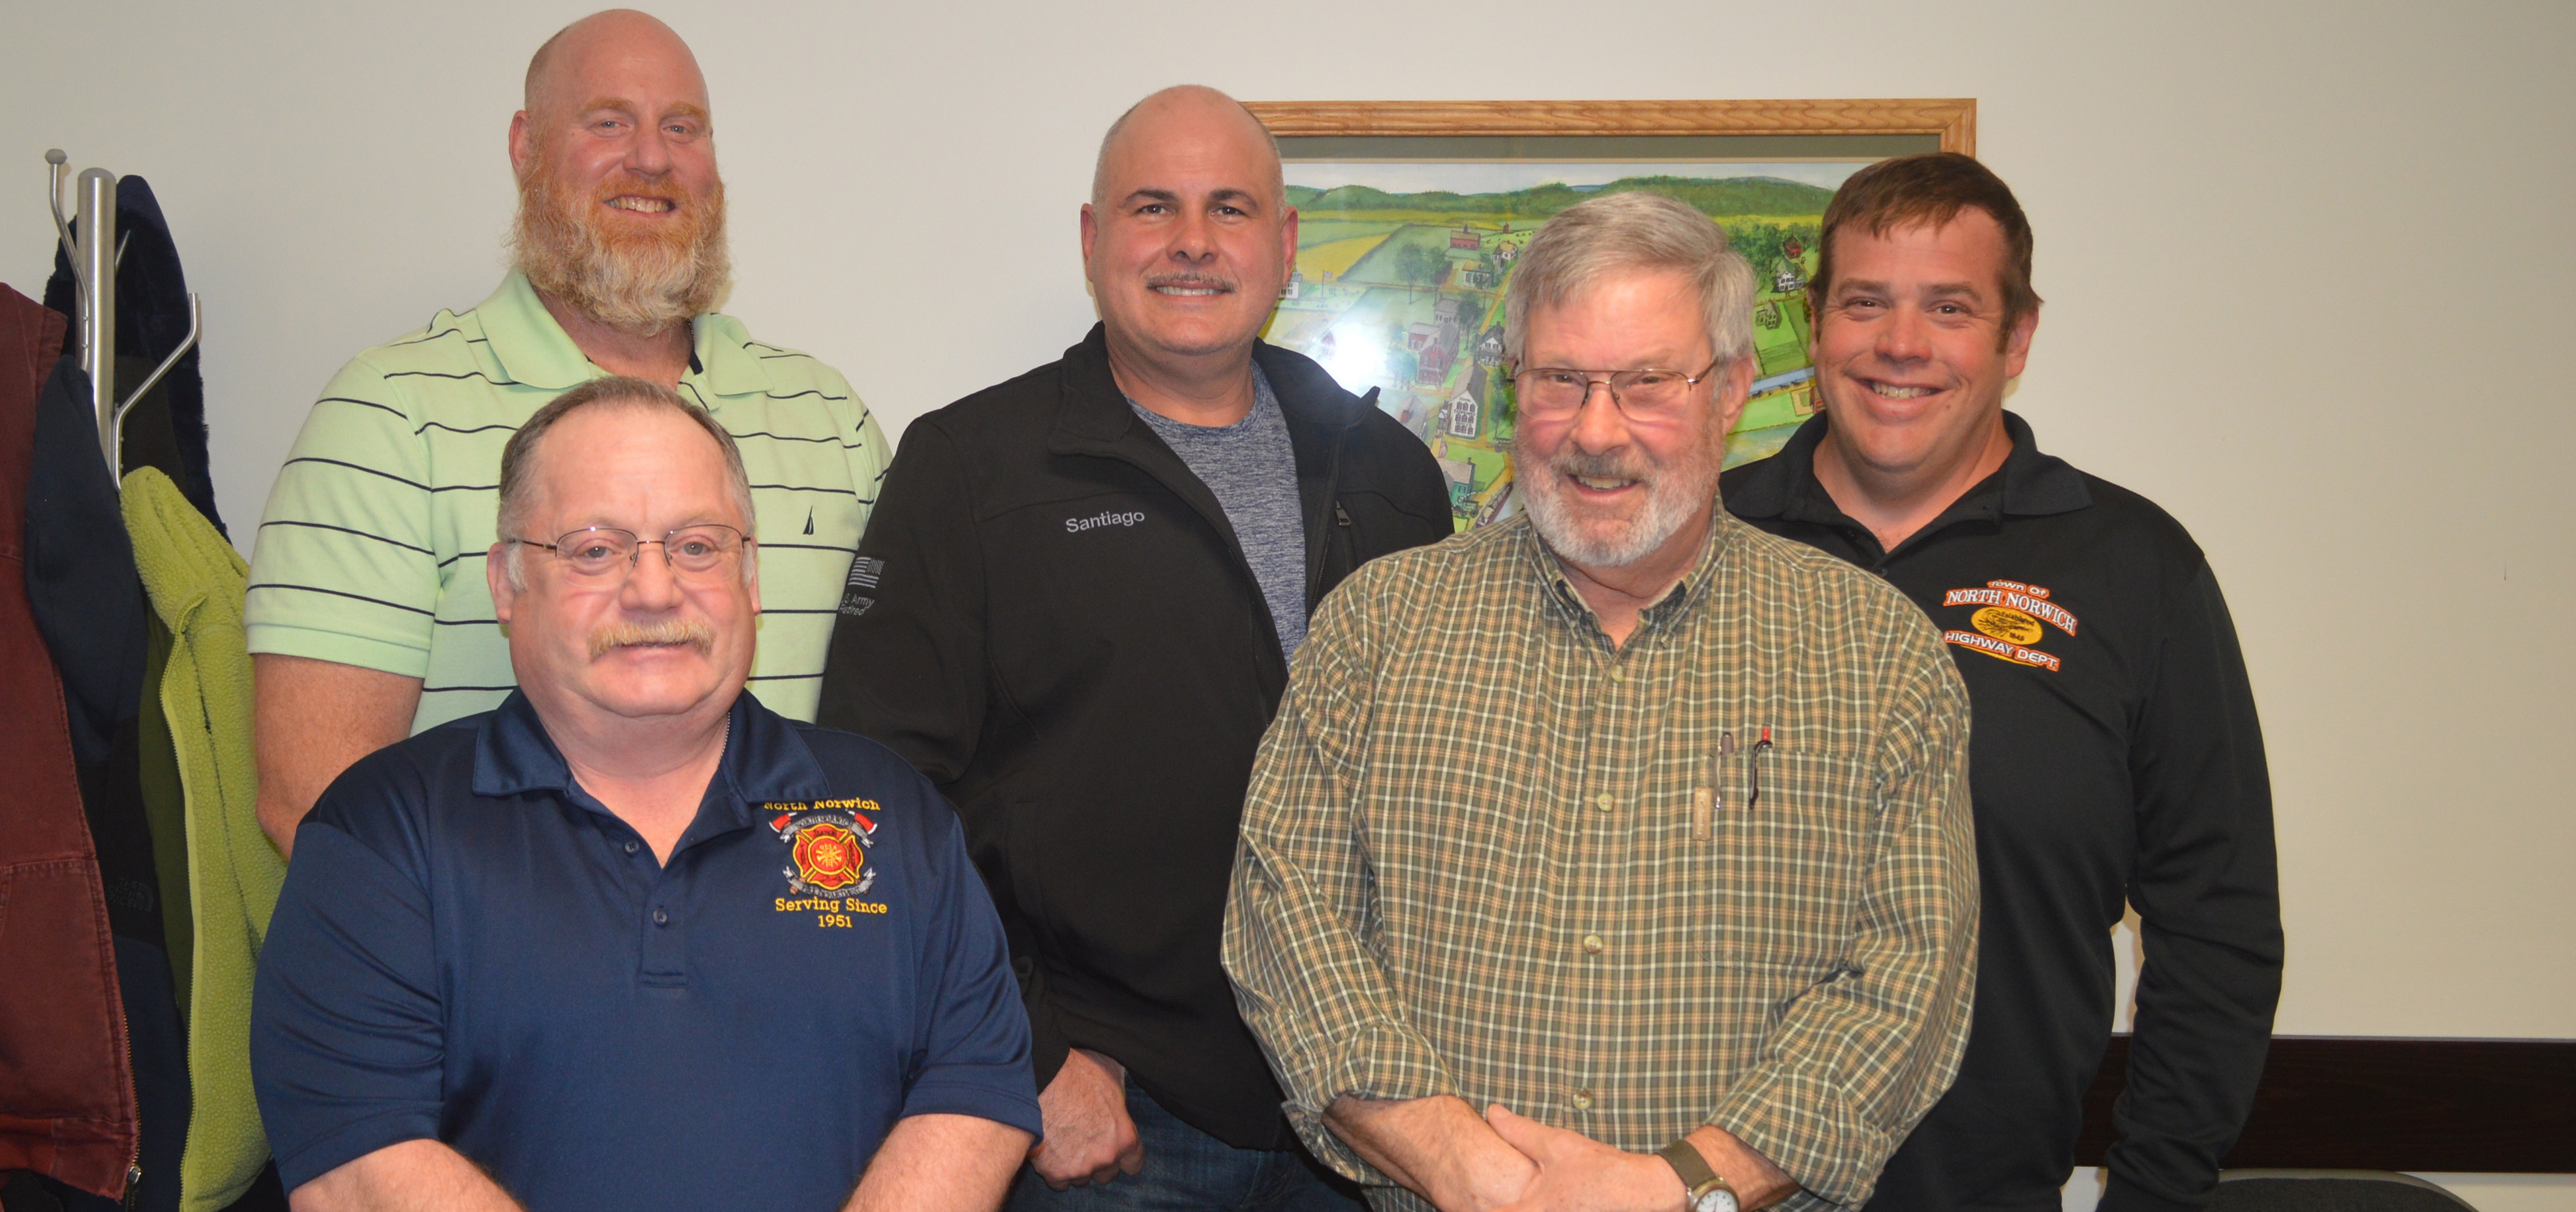 North Norwich Introduces New Town Officials